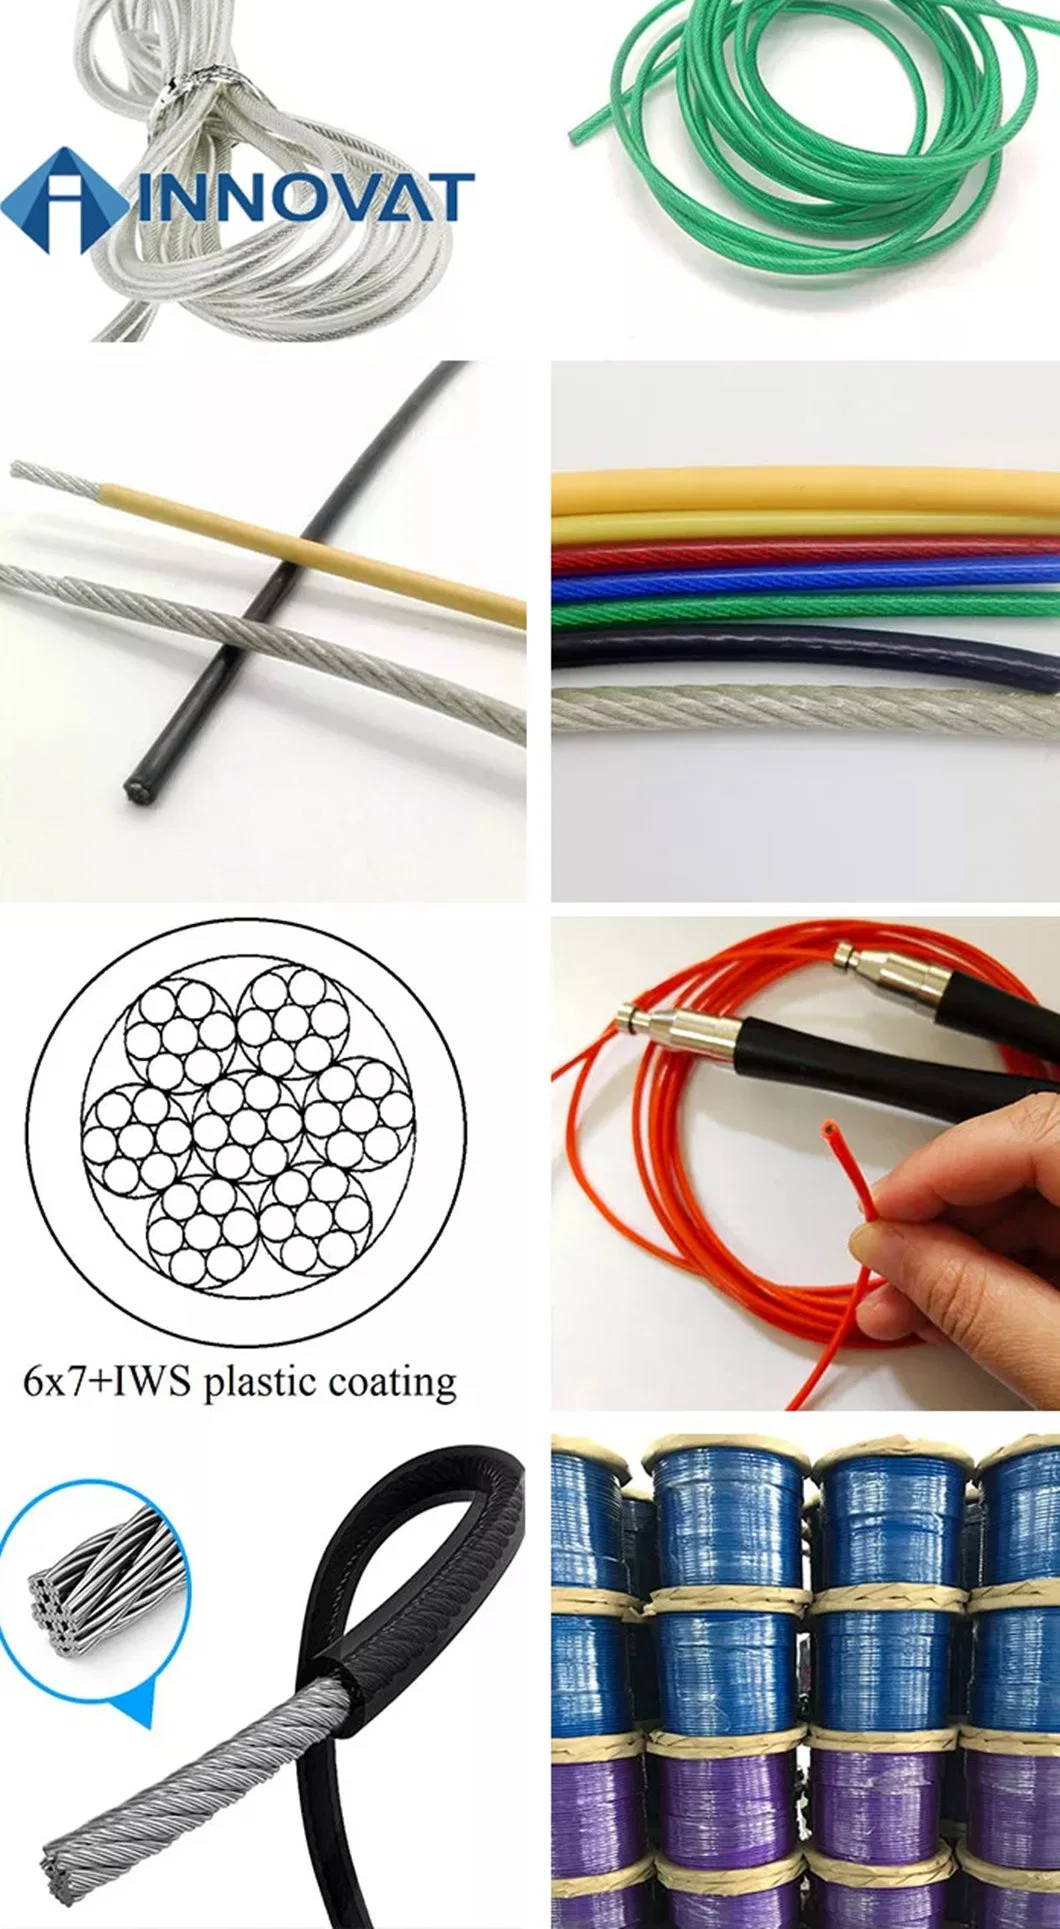 PVC Galvanized Coated Plastic Wire Agriculture and Forestry Protection Coated Plastic Aquaculture Small Coil Coated PVC Wire